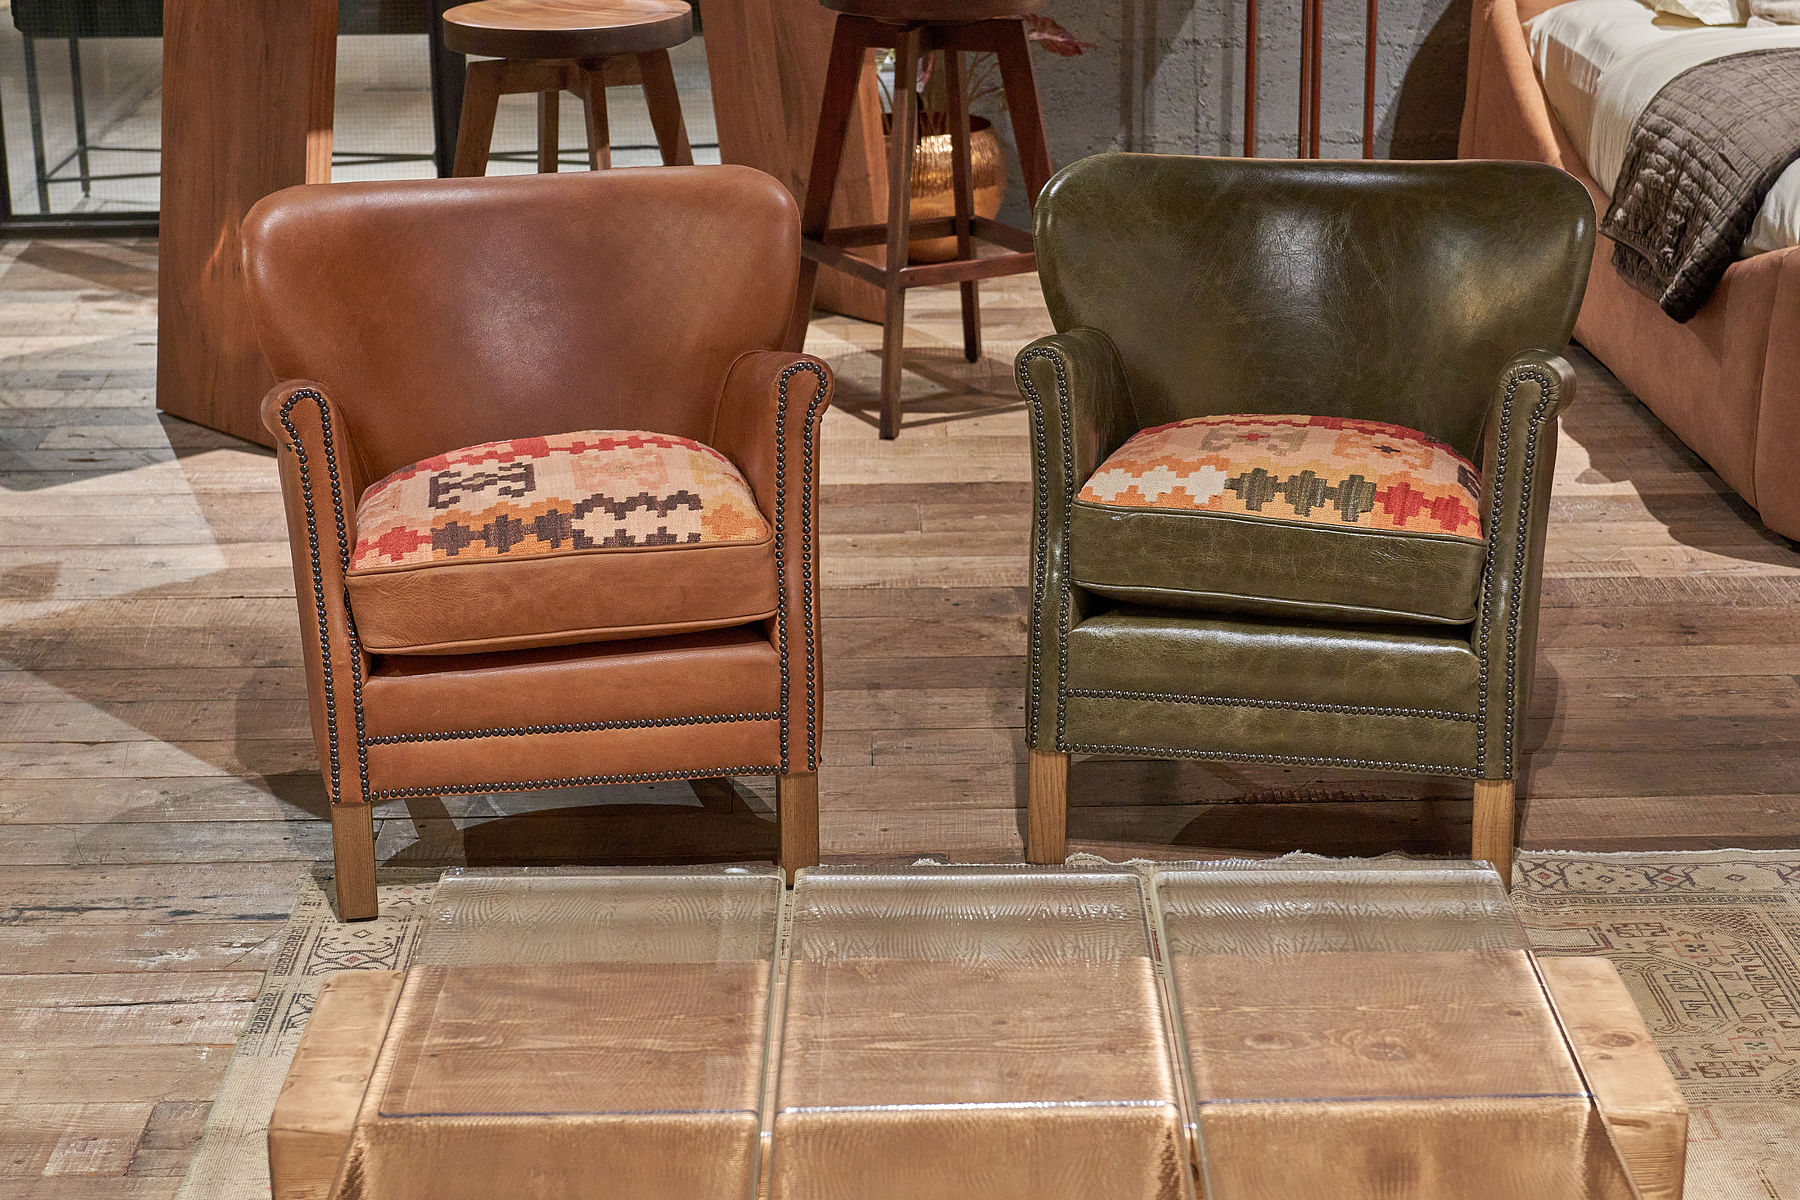 Two leather armchairs in green and brown feature tribal fabric seats and wooden legs.